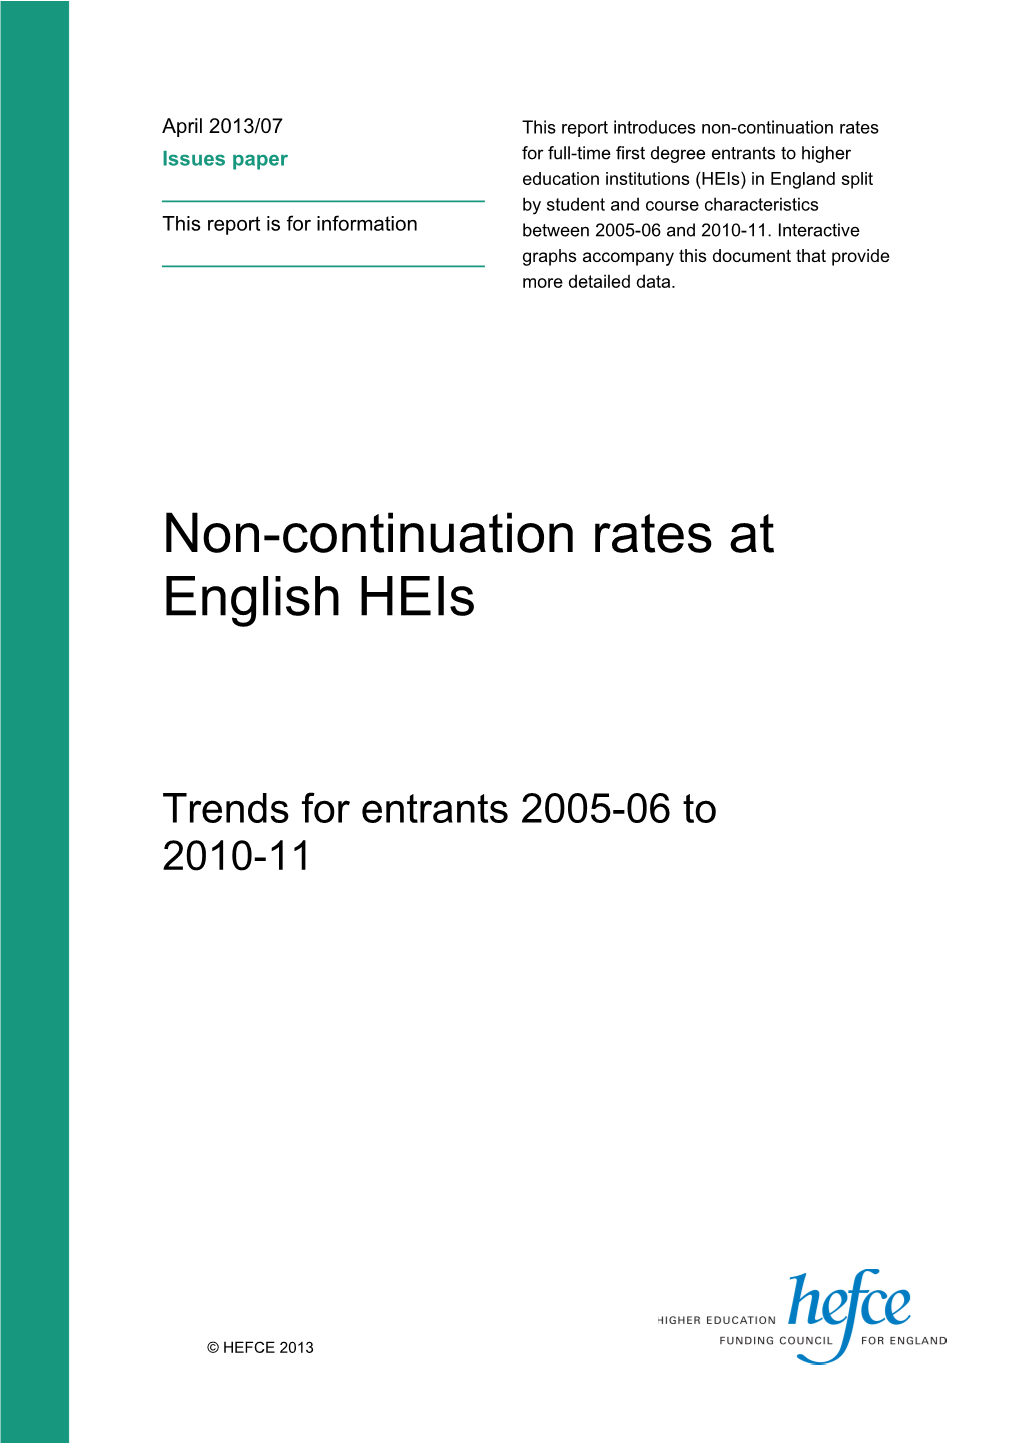 Non-Continuation Rates at English Heis: Trends for Entrants 2005-06 to 2010-11